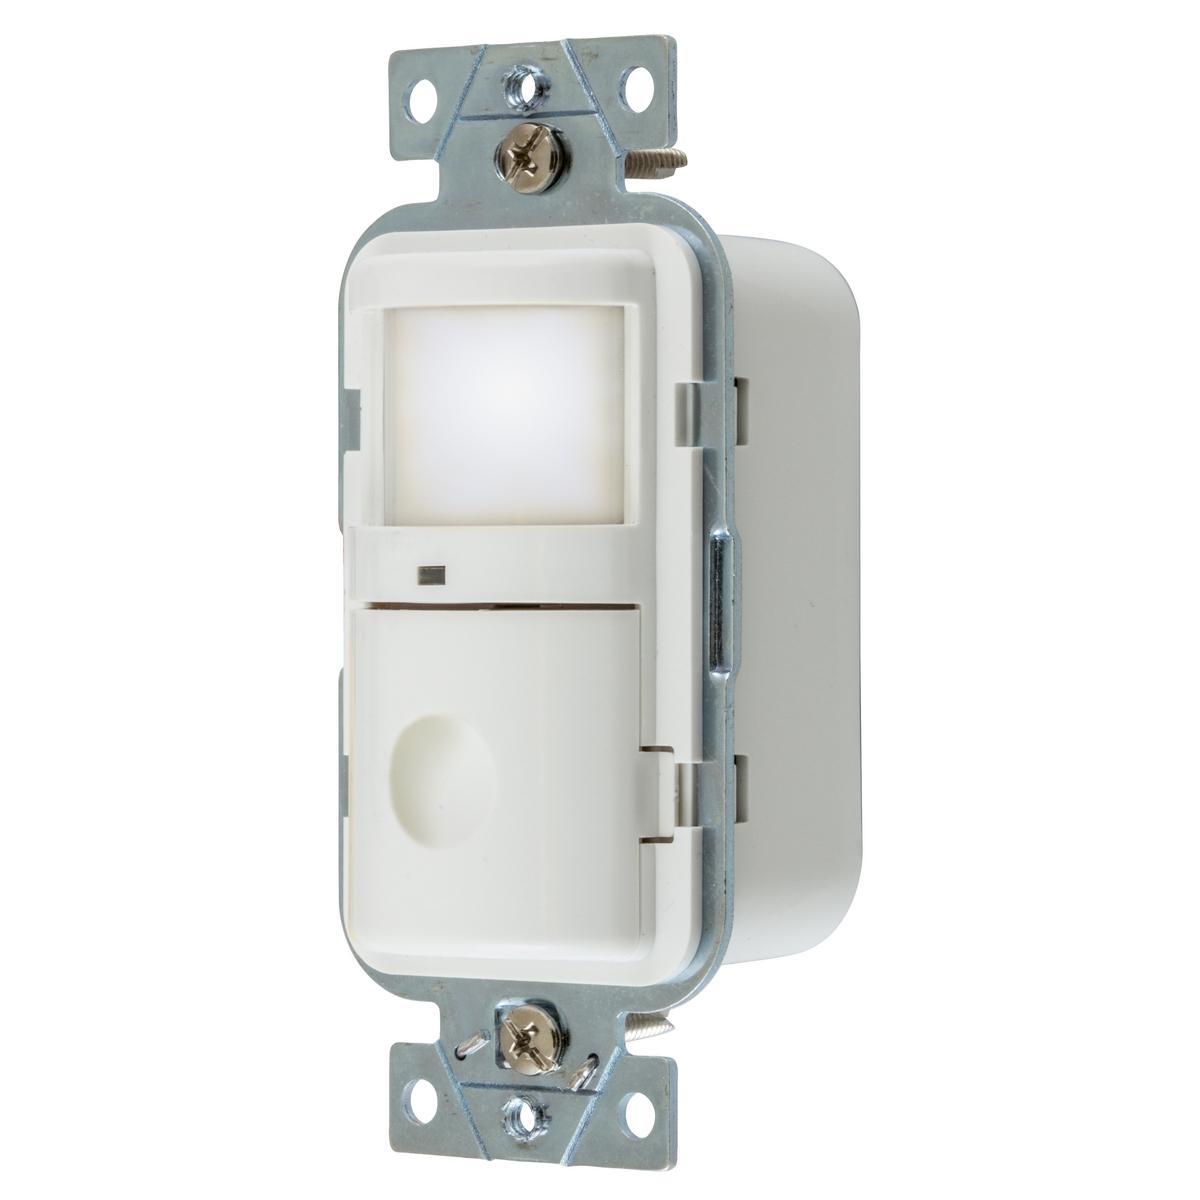 Hubbell WS2000NW Lighting Controls, Occupancy/Vacancy Sensors, Wall Switch, Passive Infrared Technology, 120/277V AC, With Night Light, White  ; With Nightlight ; 